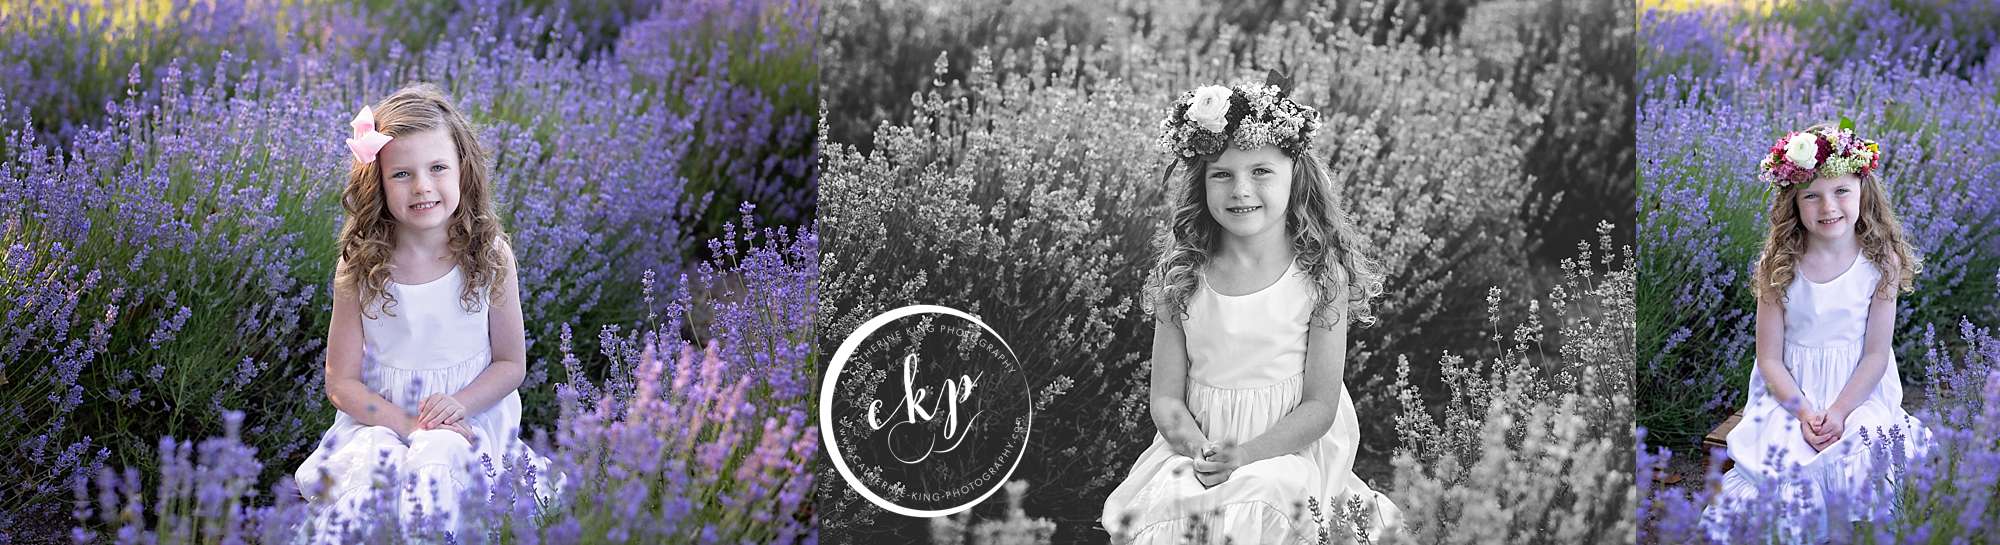 lavender photography session with catherine king photography, a madison ct family photographer